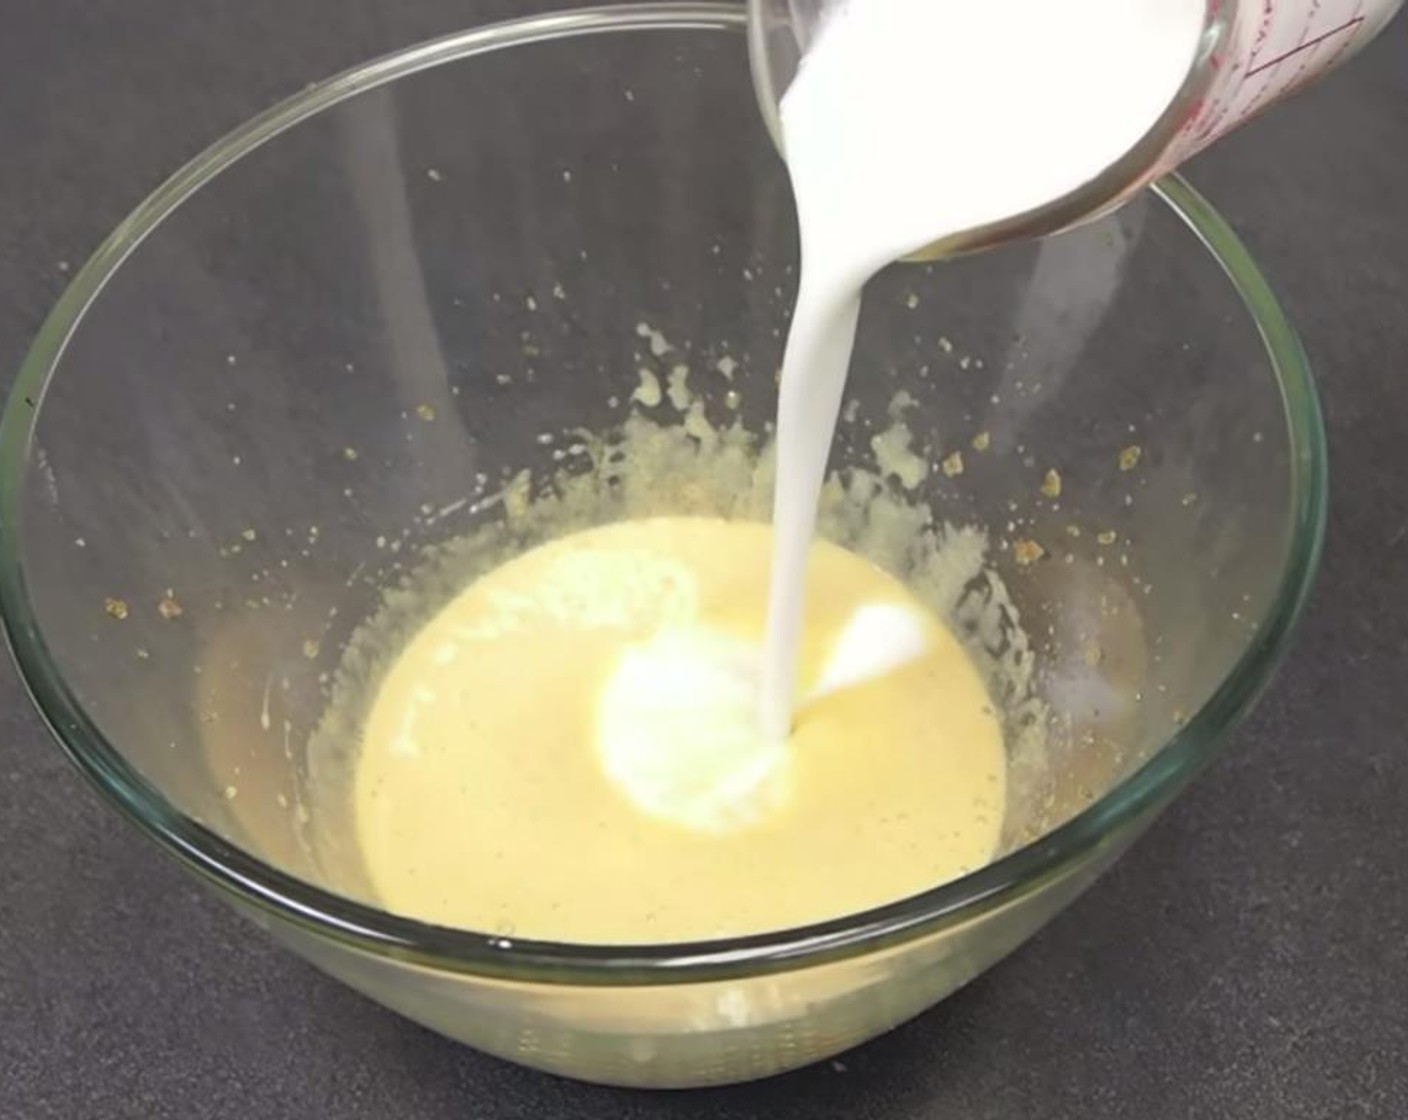 step 1 Preheat the oven 350 degrees F (180 degrees C). In the first bowl, whisk together Canola Oil (1/4 cup), Granulated Sugar (1/2 cup), Vanilla Extract (1 tsp), Milk (3/4 cup) and Egg (1). Whisk until foamy.